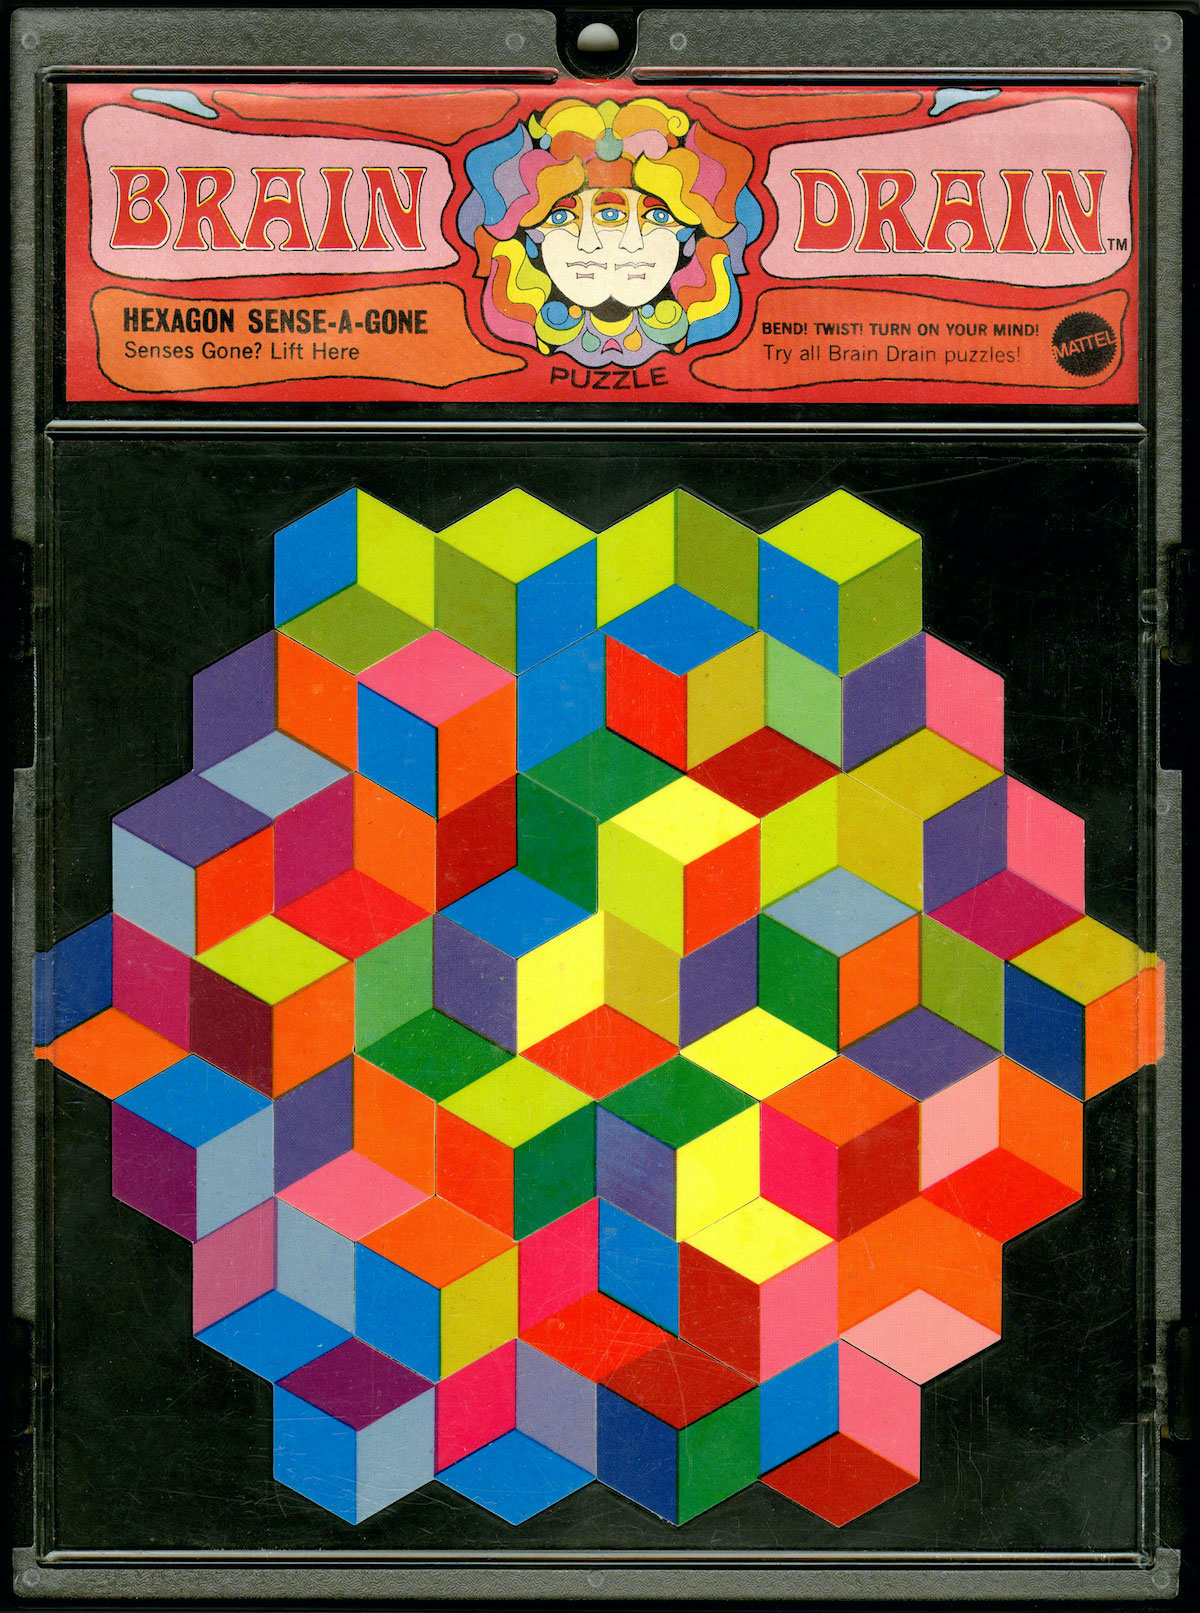 Psychedelic 1969 Opart Puzzle, Om Art Puzzle 